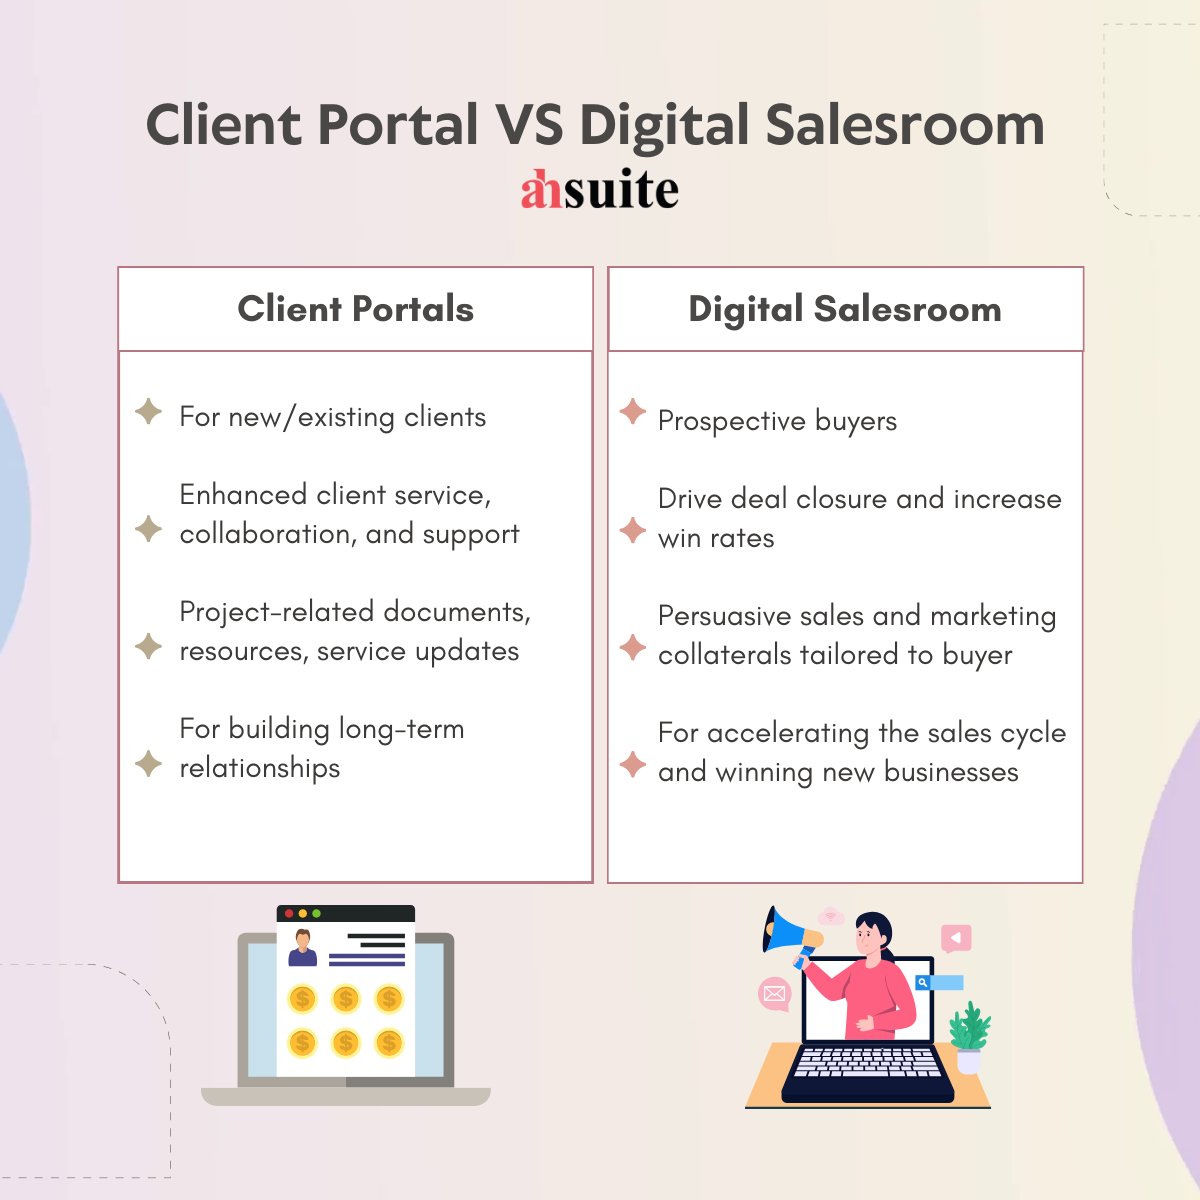 Client Portals vs Digital Salesroom

Both options can streamline #clientinteractions and level up #customersatisfaction. But knowing when to use the proper platform is crucial to maximize #businesssuccess. 

Use the comparison list to know the right tool for you 👇